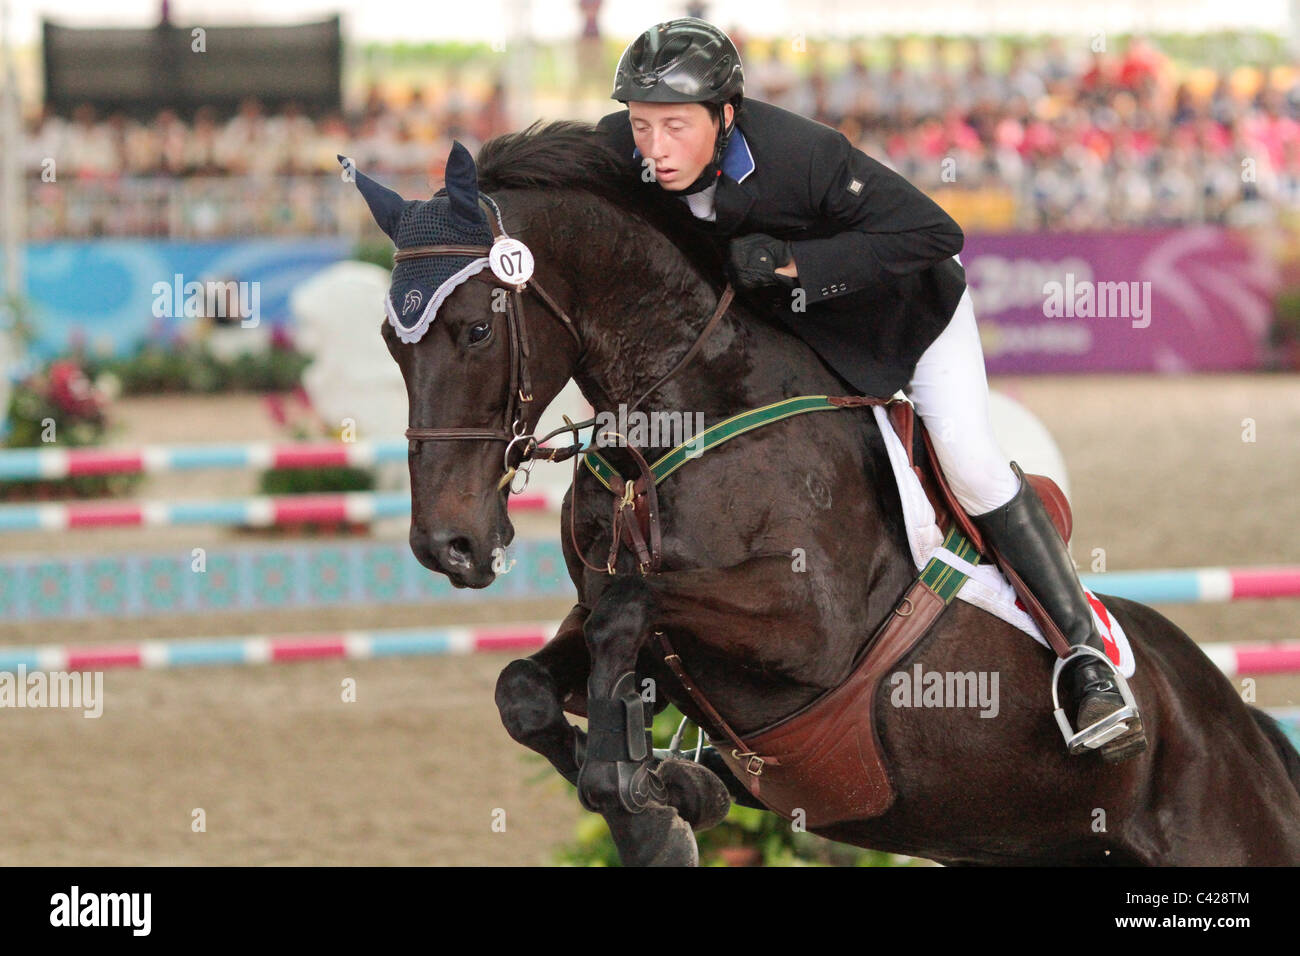 Martin Fuchs of Switzerland riding MIDNIGHT MIST during the Youth Olympic Games 2010 Equestrian Jumping Individual Round B. Stock Photo